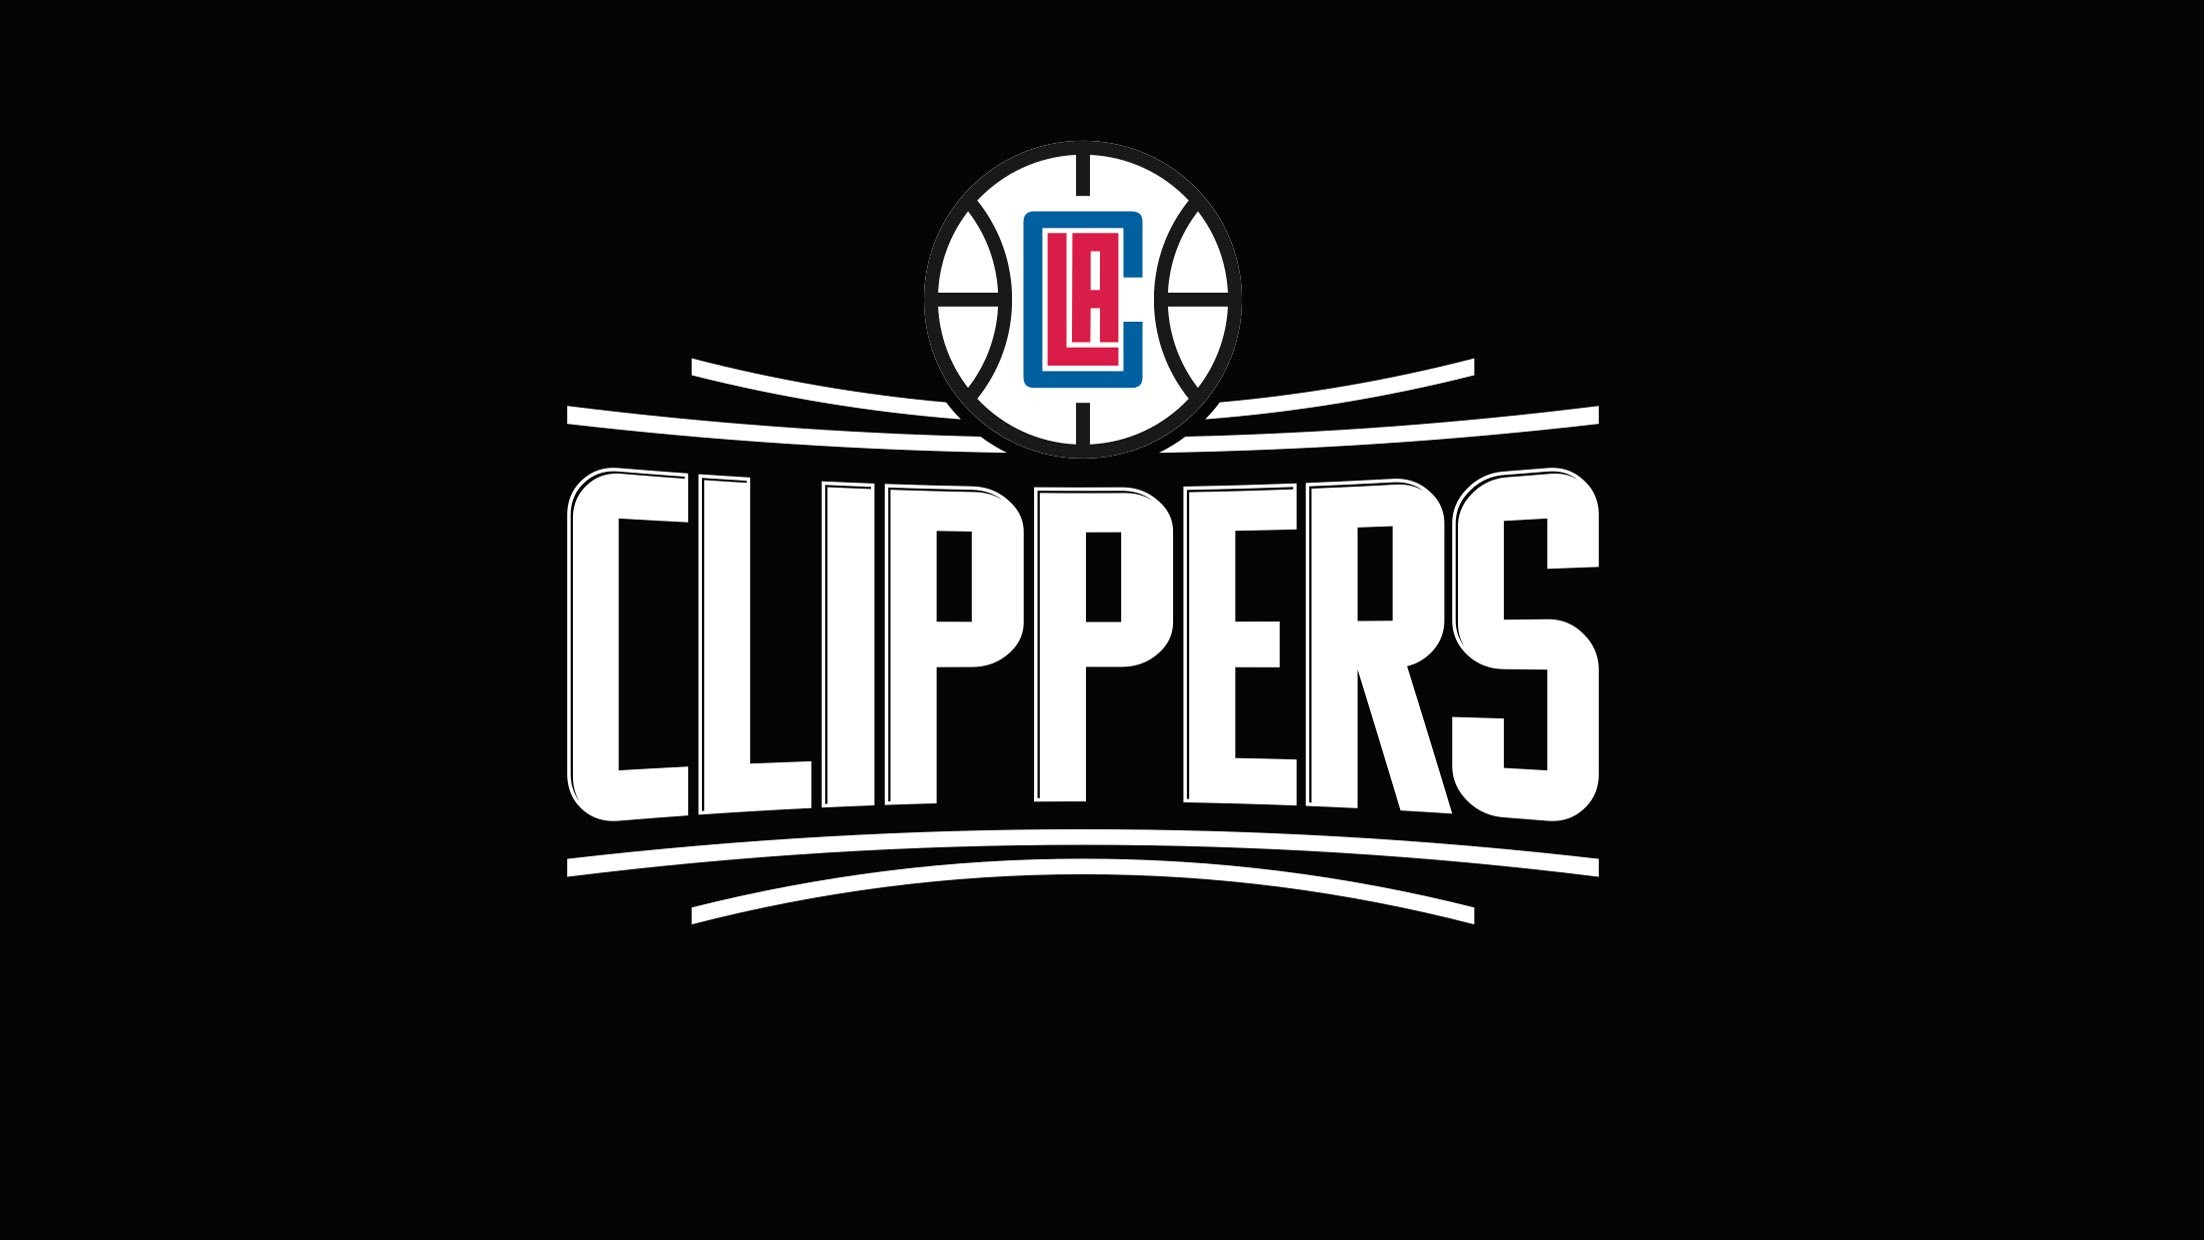 2204x1240 Los Angeles Clippers Wallpaper 21 - 2204 X 1240